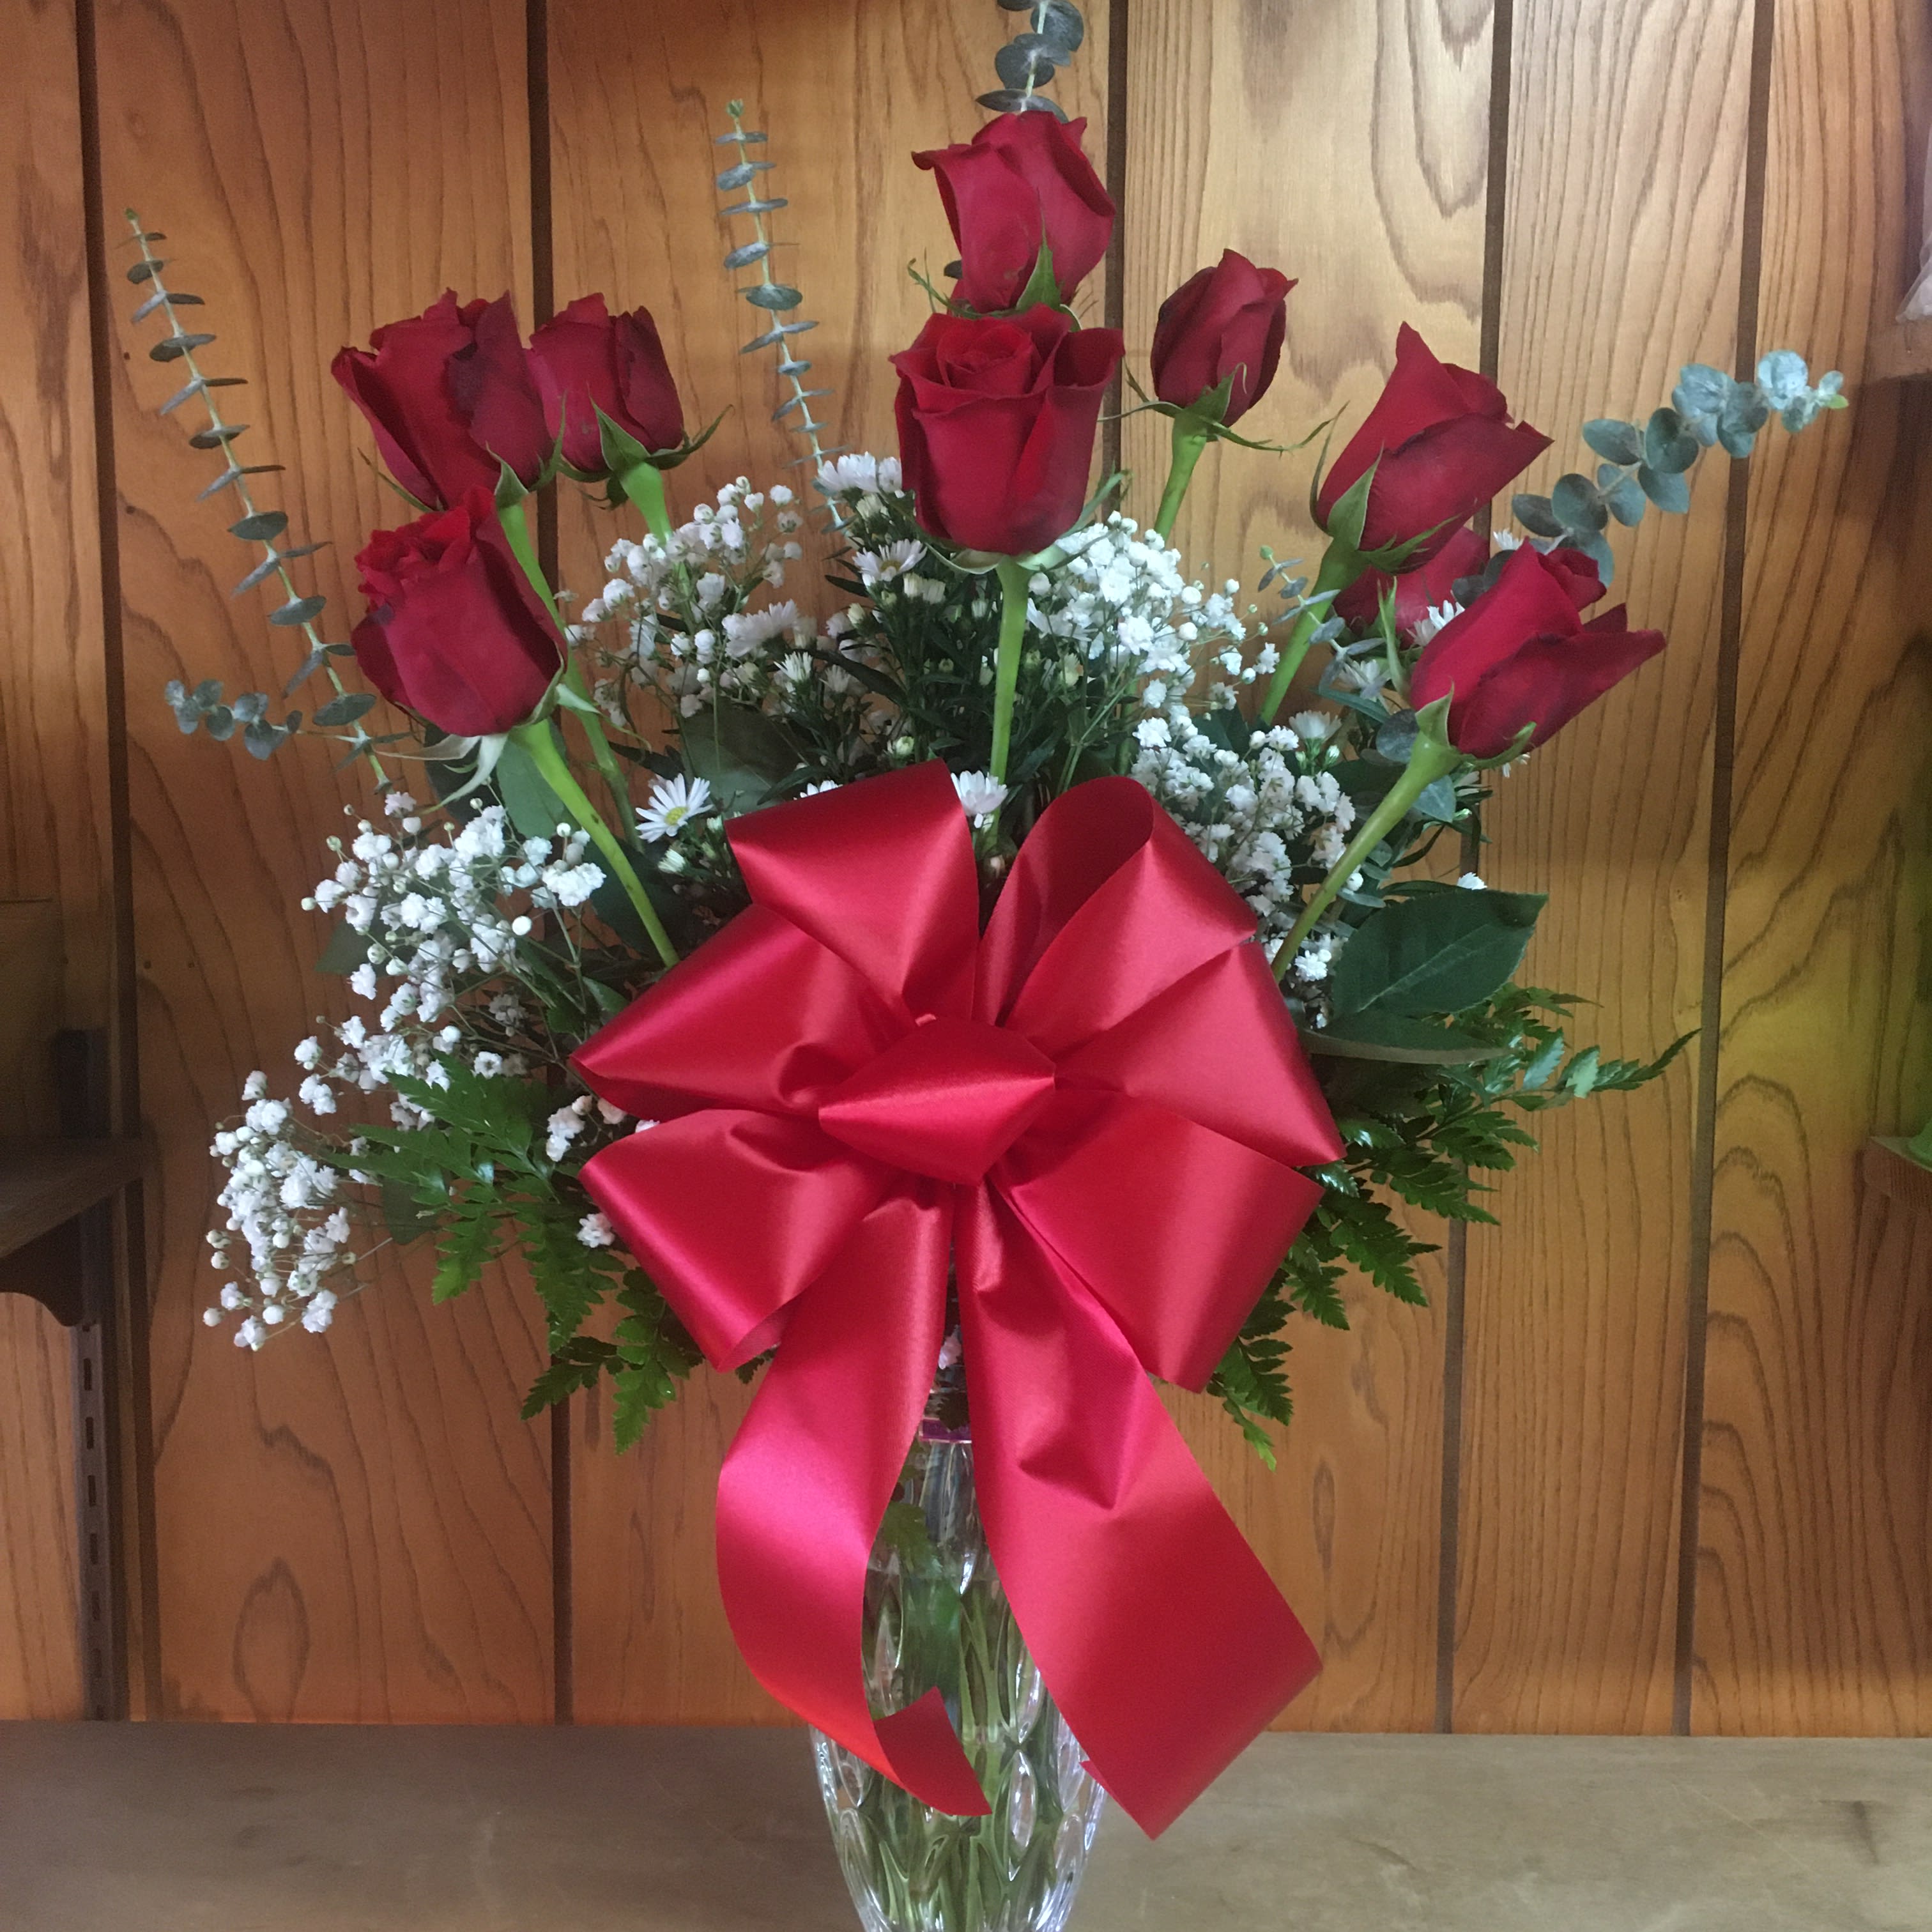 Crystal Rainfall w/ Red Roses - Send this elegant gift of red roses arranged in authentic 9&quot;H Waterford Crystal vase styled and etched in a Rainfall design. Includes greens, filler, eucalyptus, and ribbon. 12 roses for standard; 18 roses for deluxe.